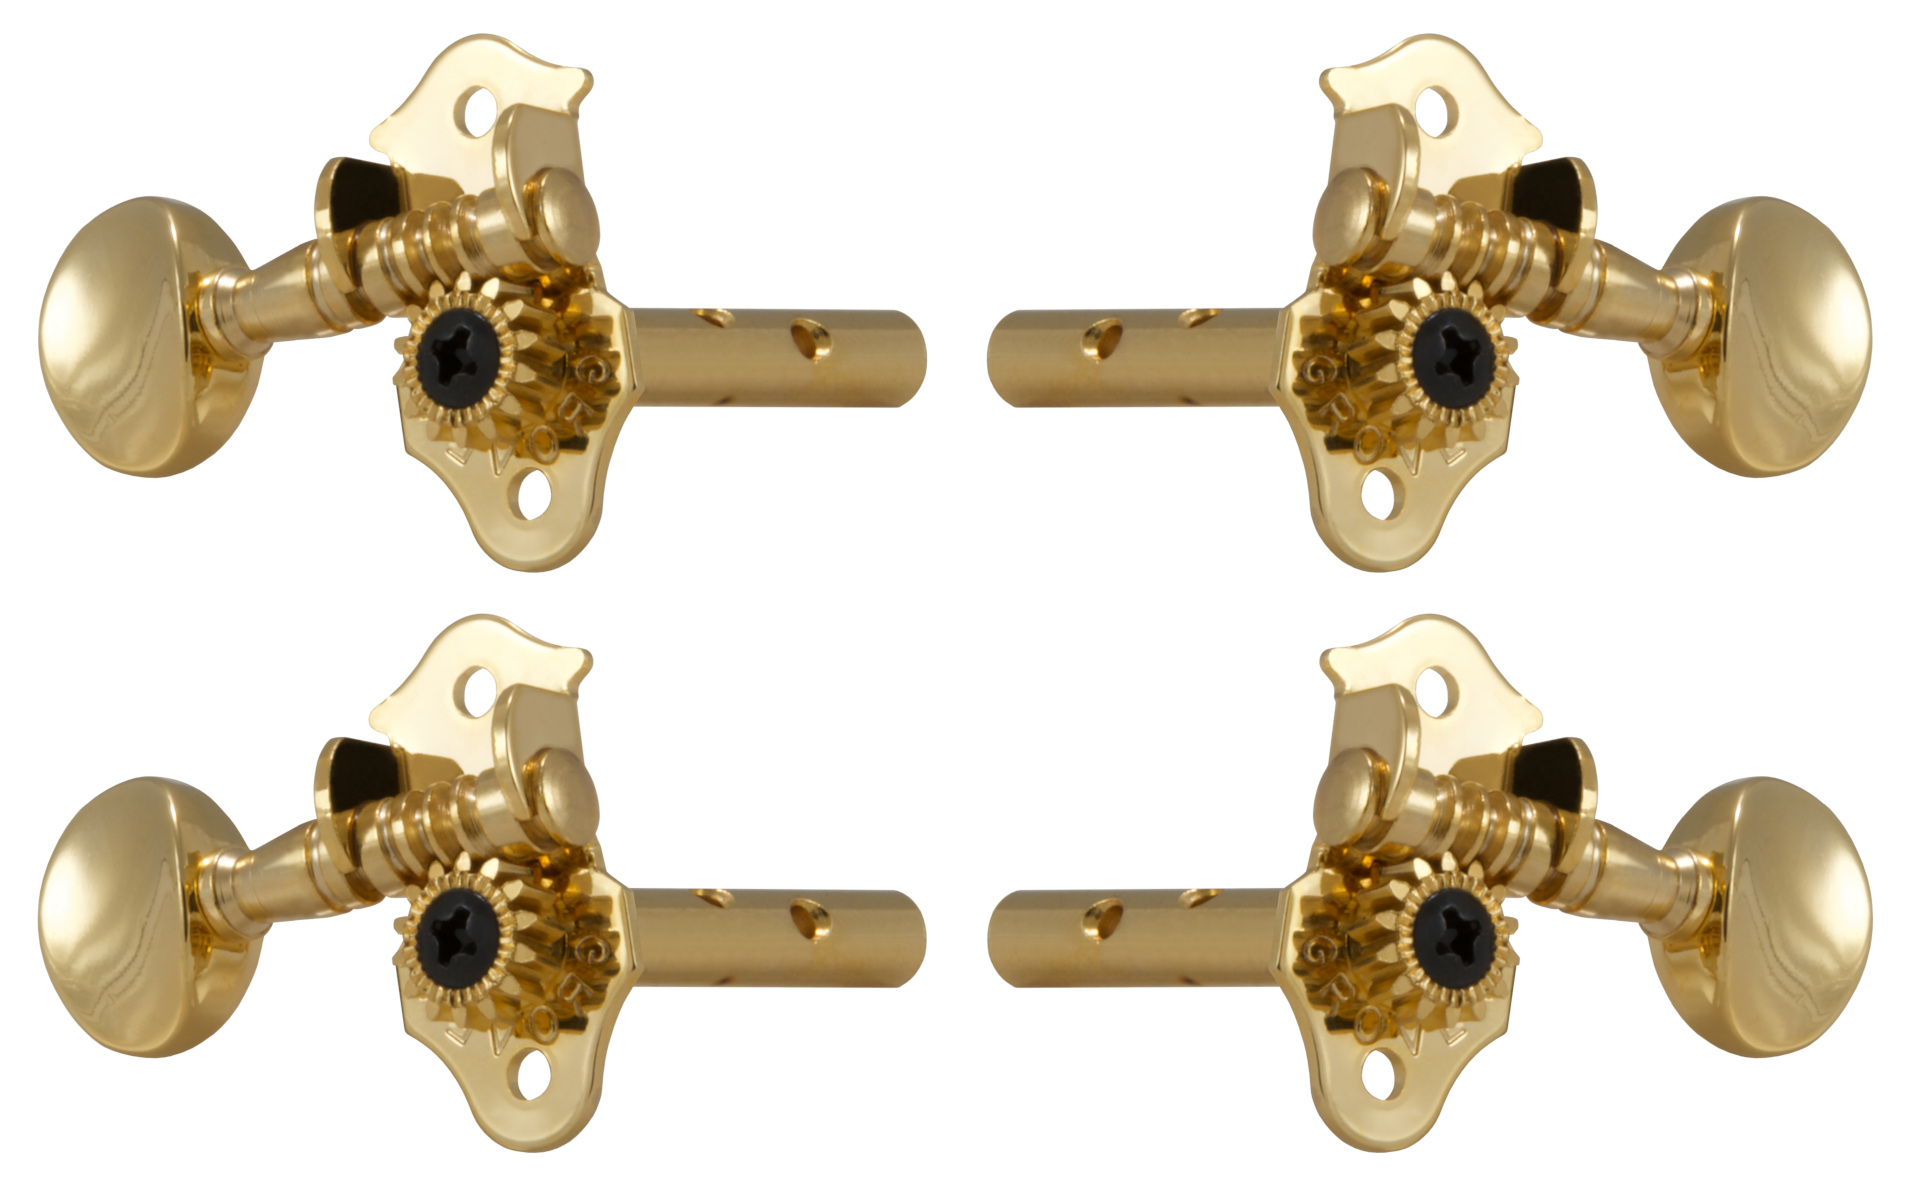 Grover 708G Sta-Tite Dulcimer Pegs with Metal Button - 4 pcs. - Gold